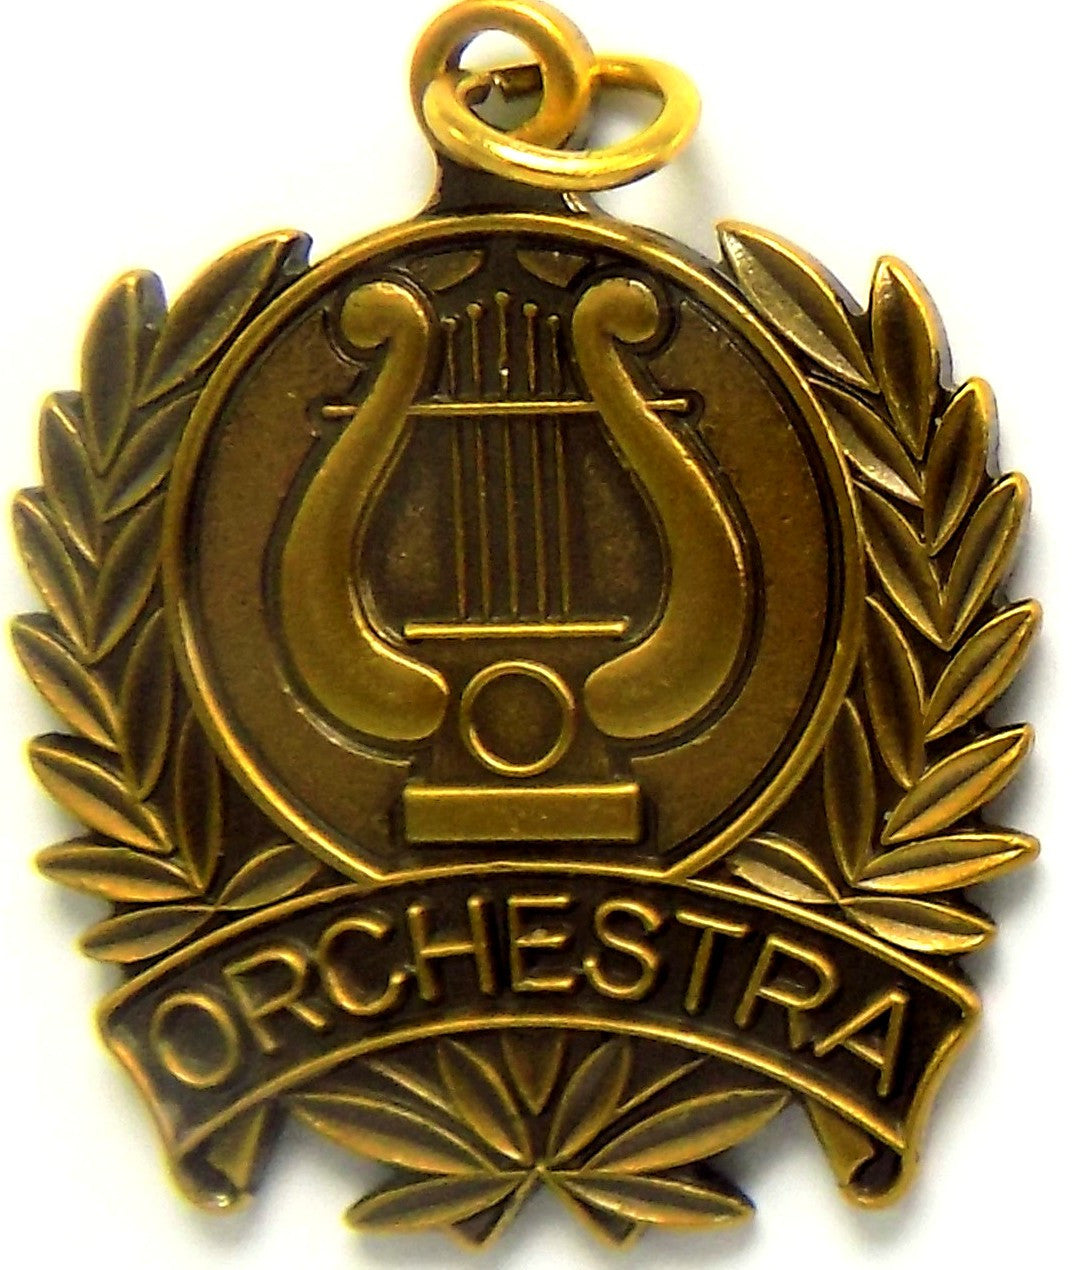 Orchestra Music Medals